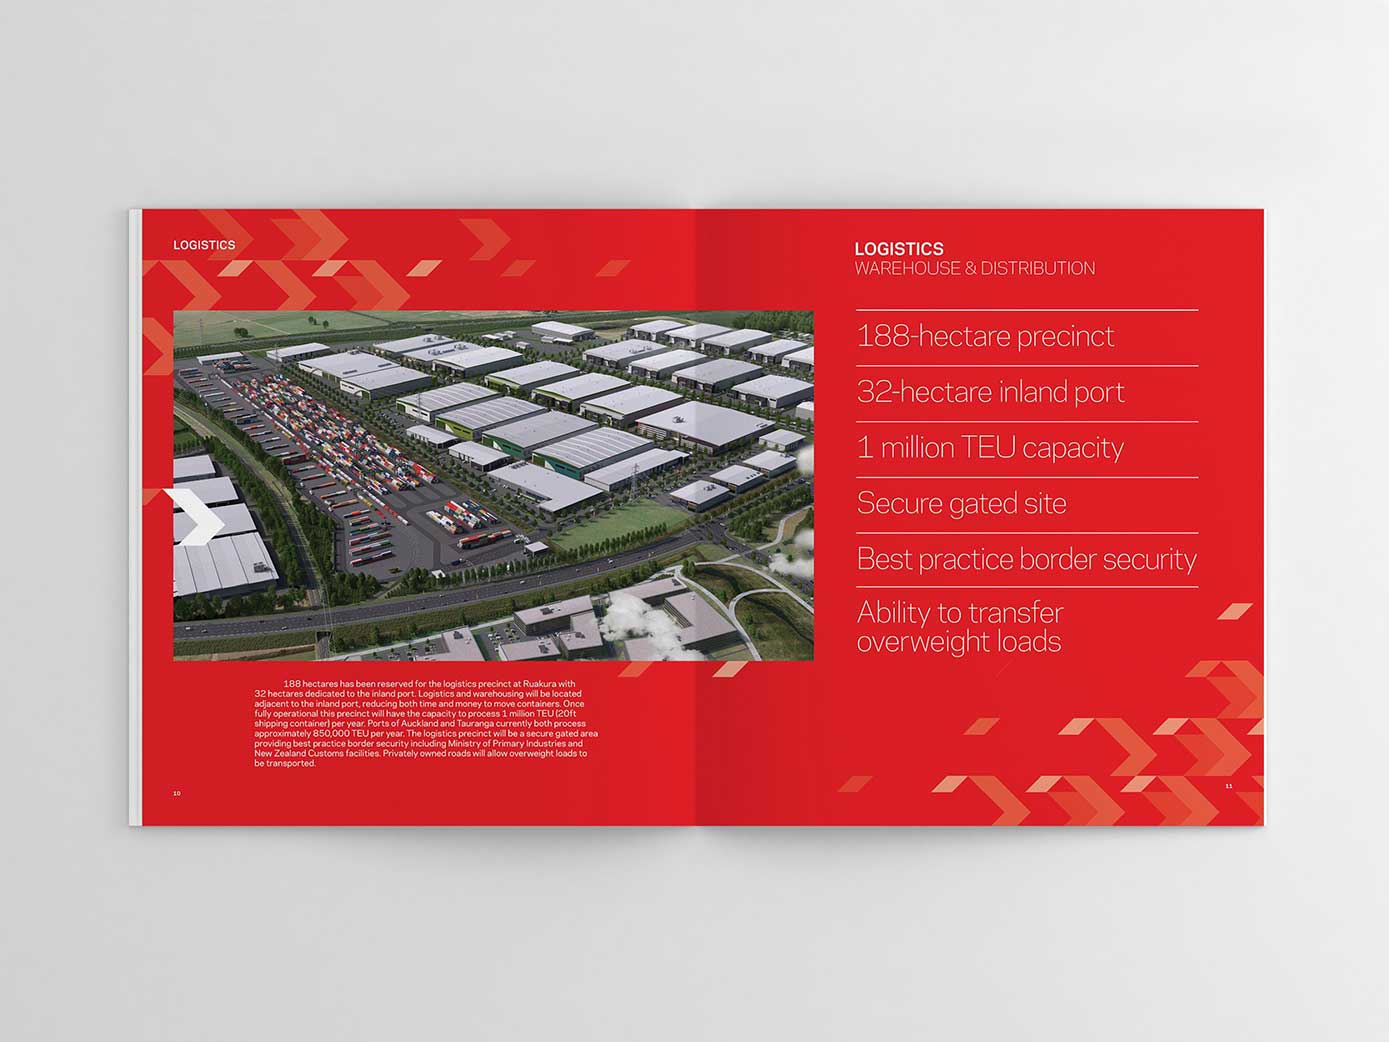 Double page spread disscussing the capabilities of warehouses and distribution facilities in the Ruakura